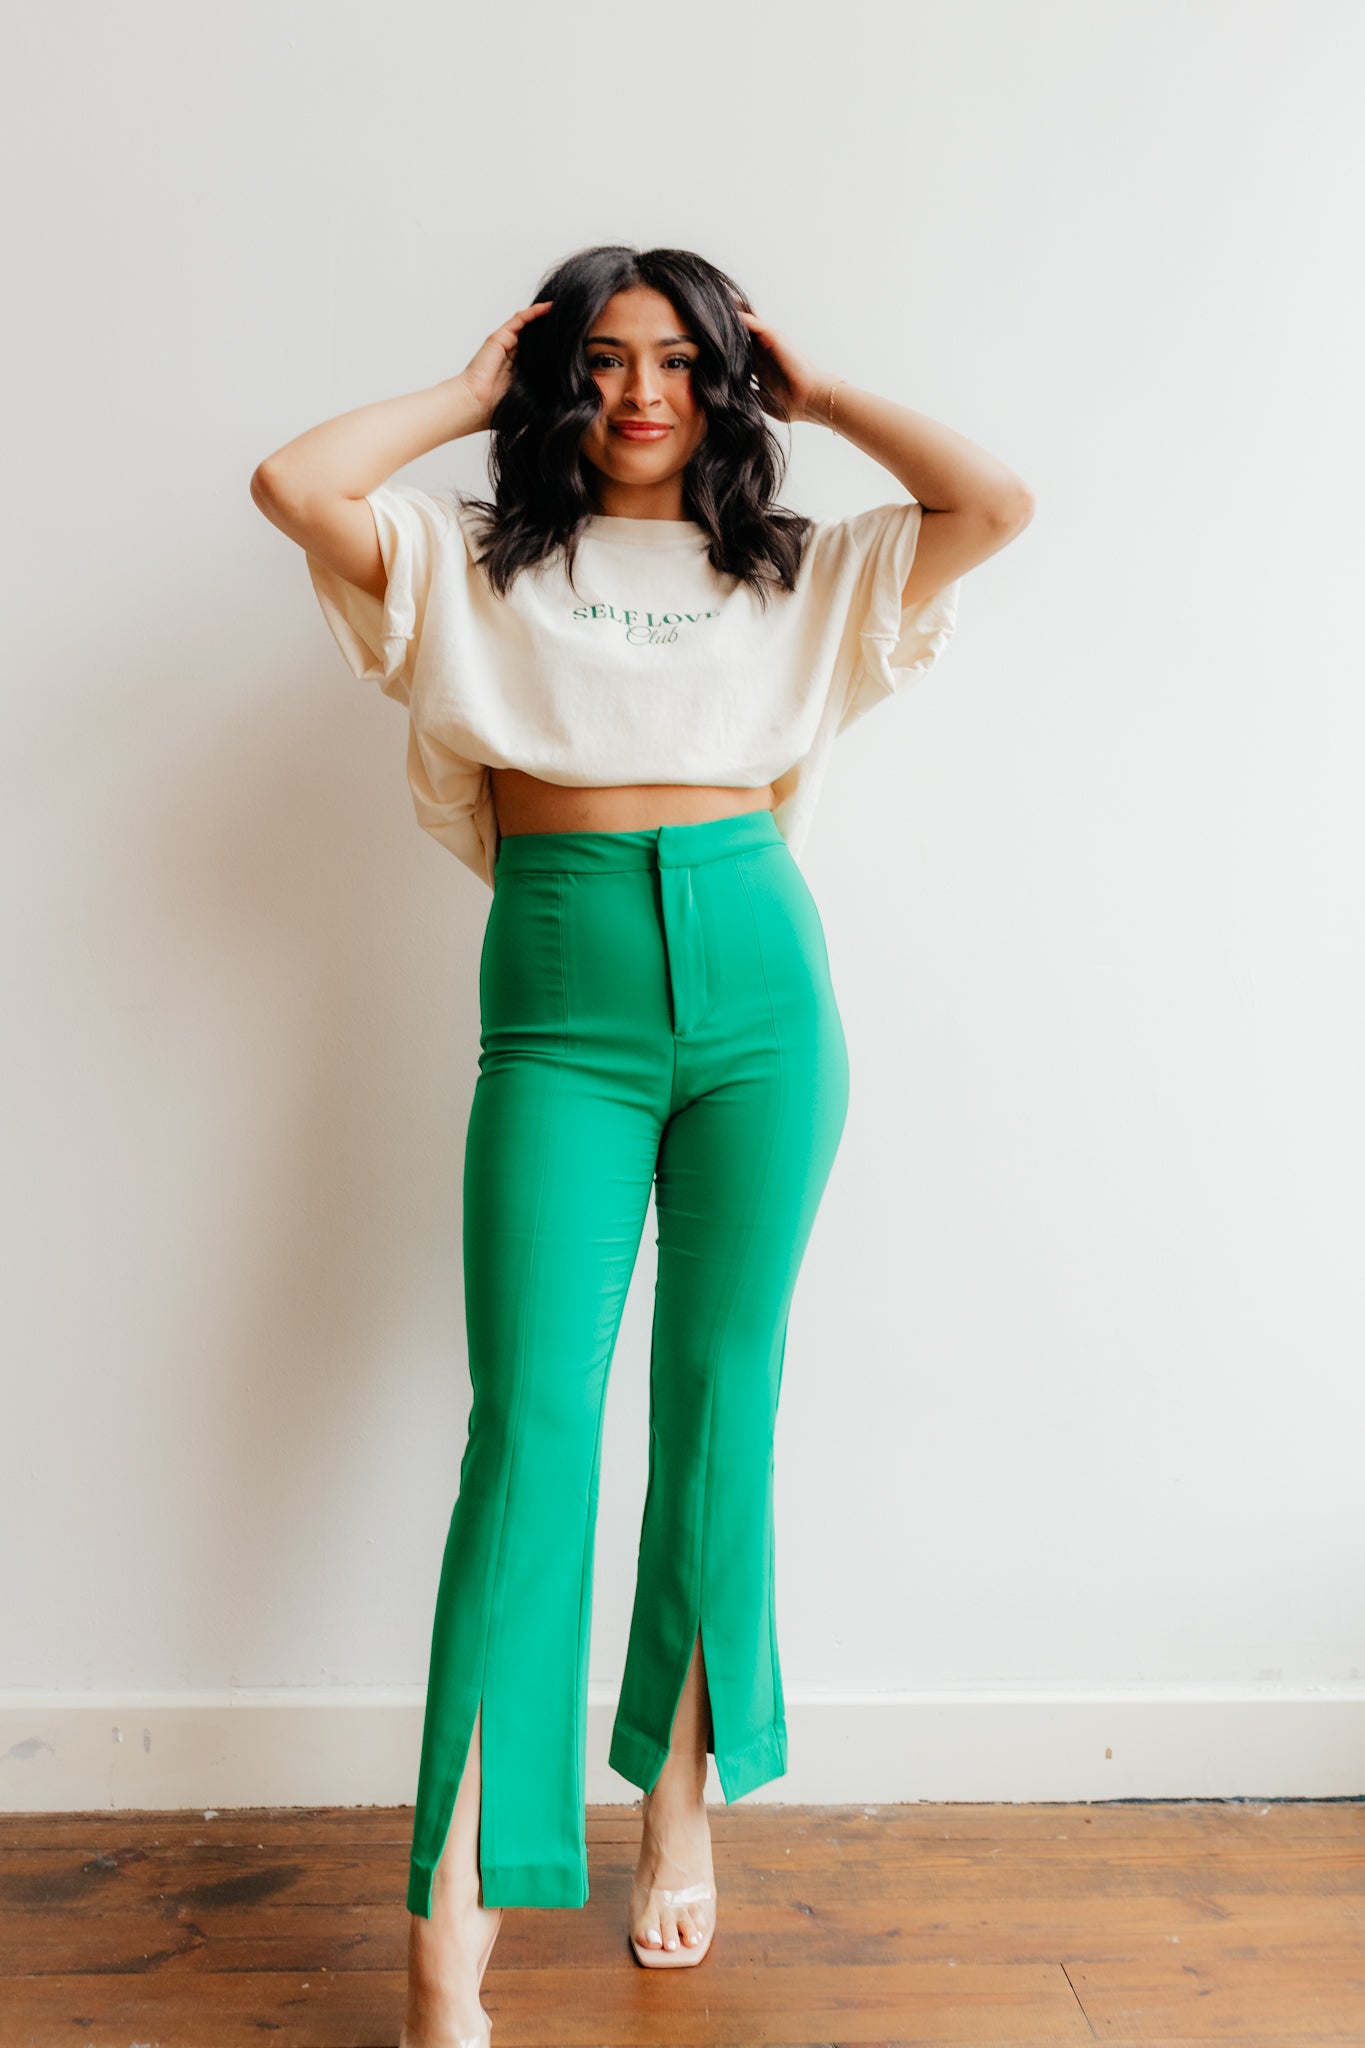 High Waisted Front Split Work Pants